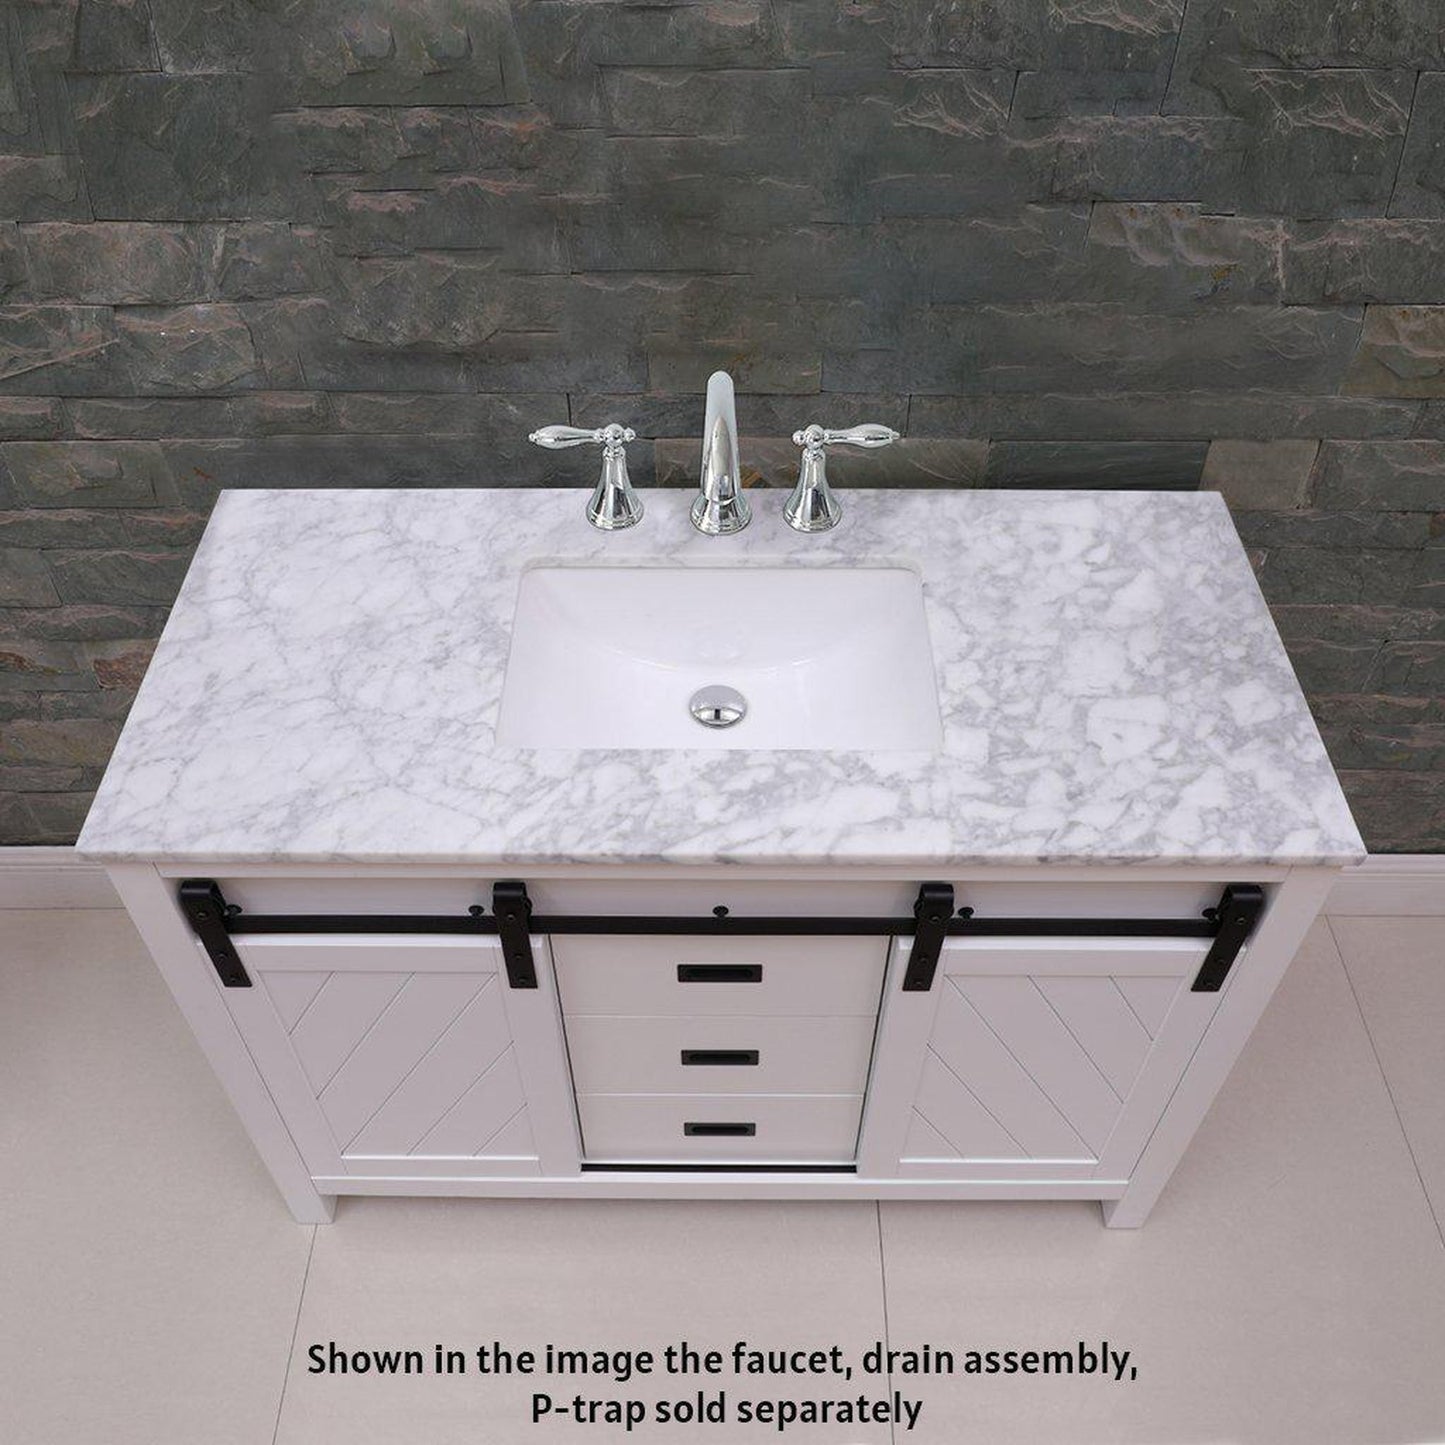 Altair Kinsley 48" Single White Freestanding Bathroom Vanity Set With Natural Carrara White Marble Top, Rectangular Undermount Ceramic Sink, and Overflow